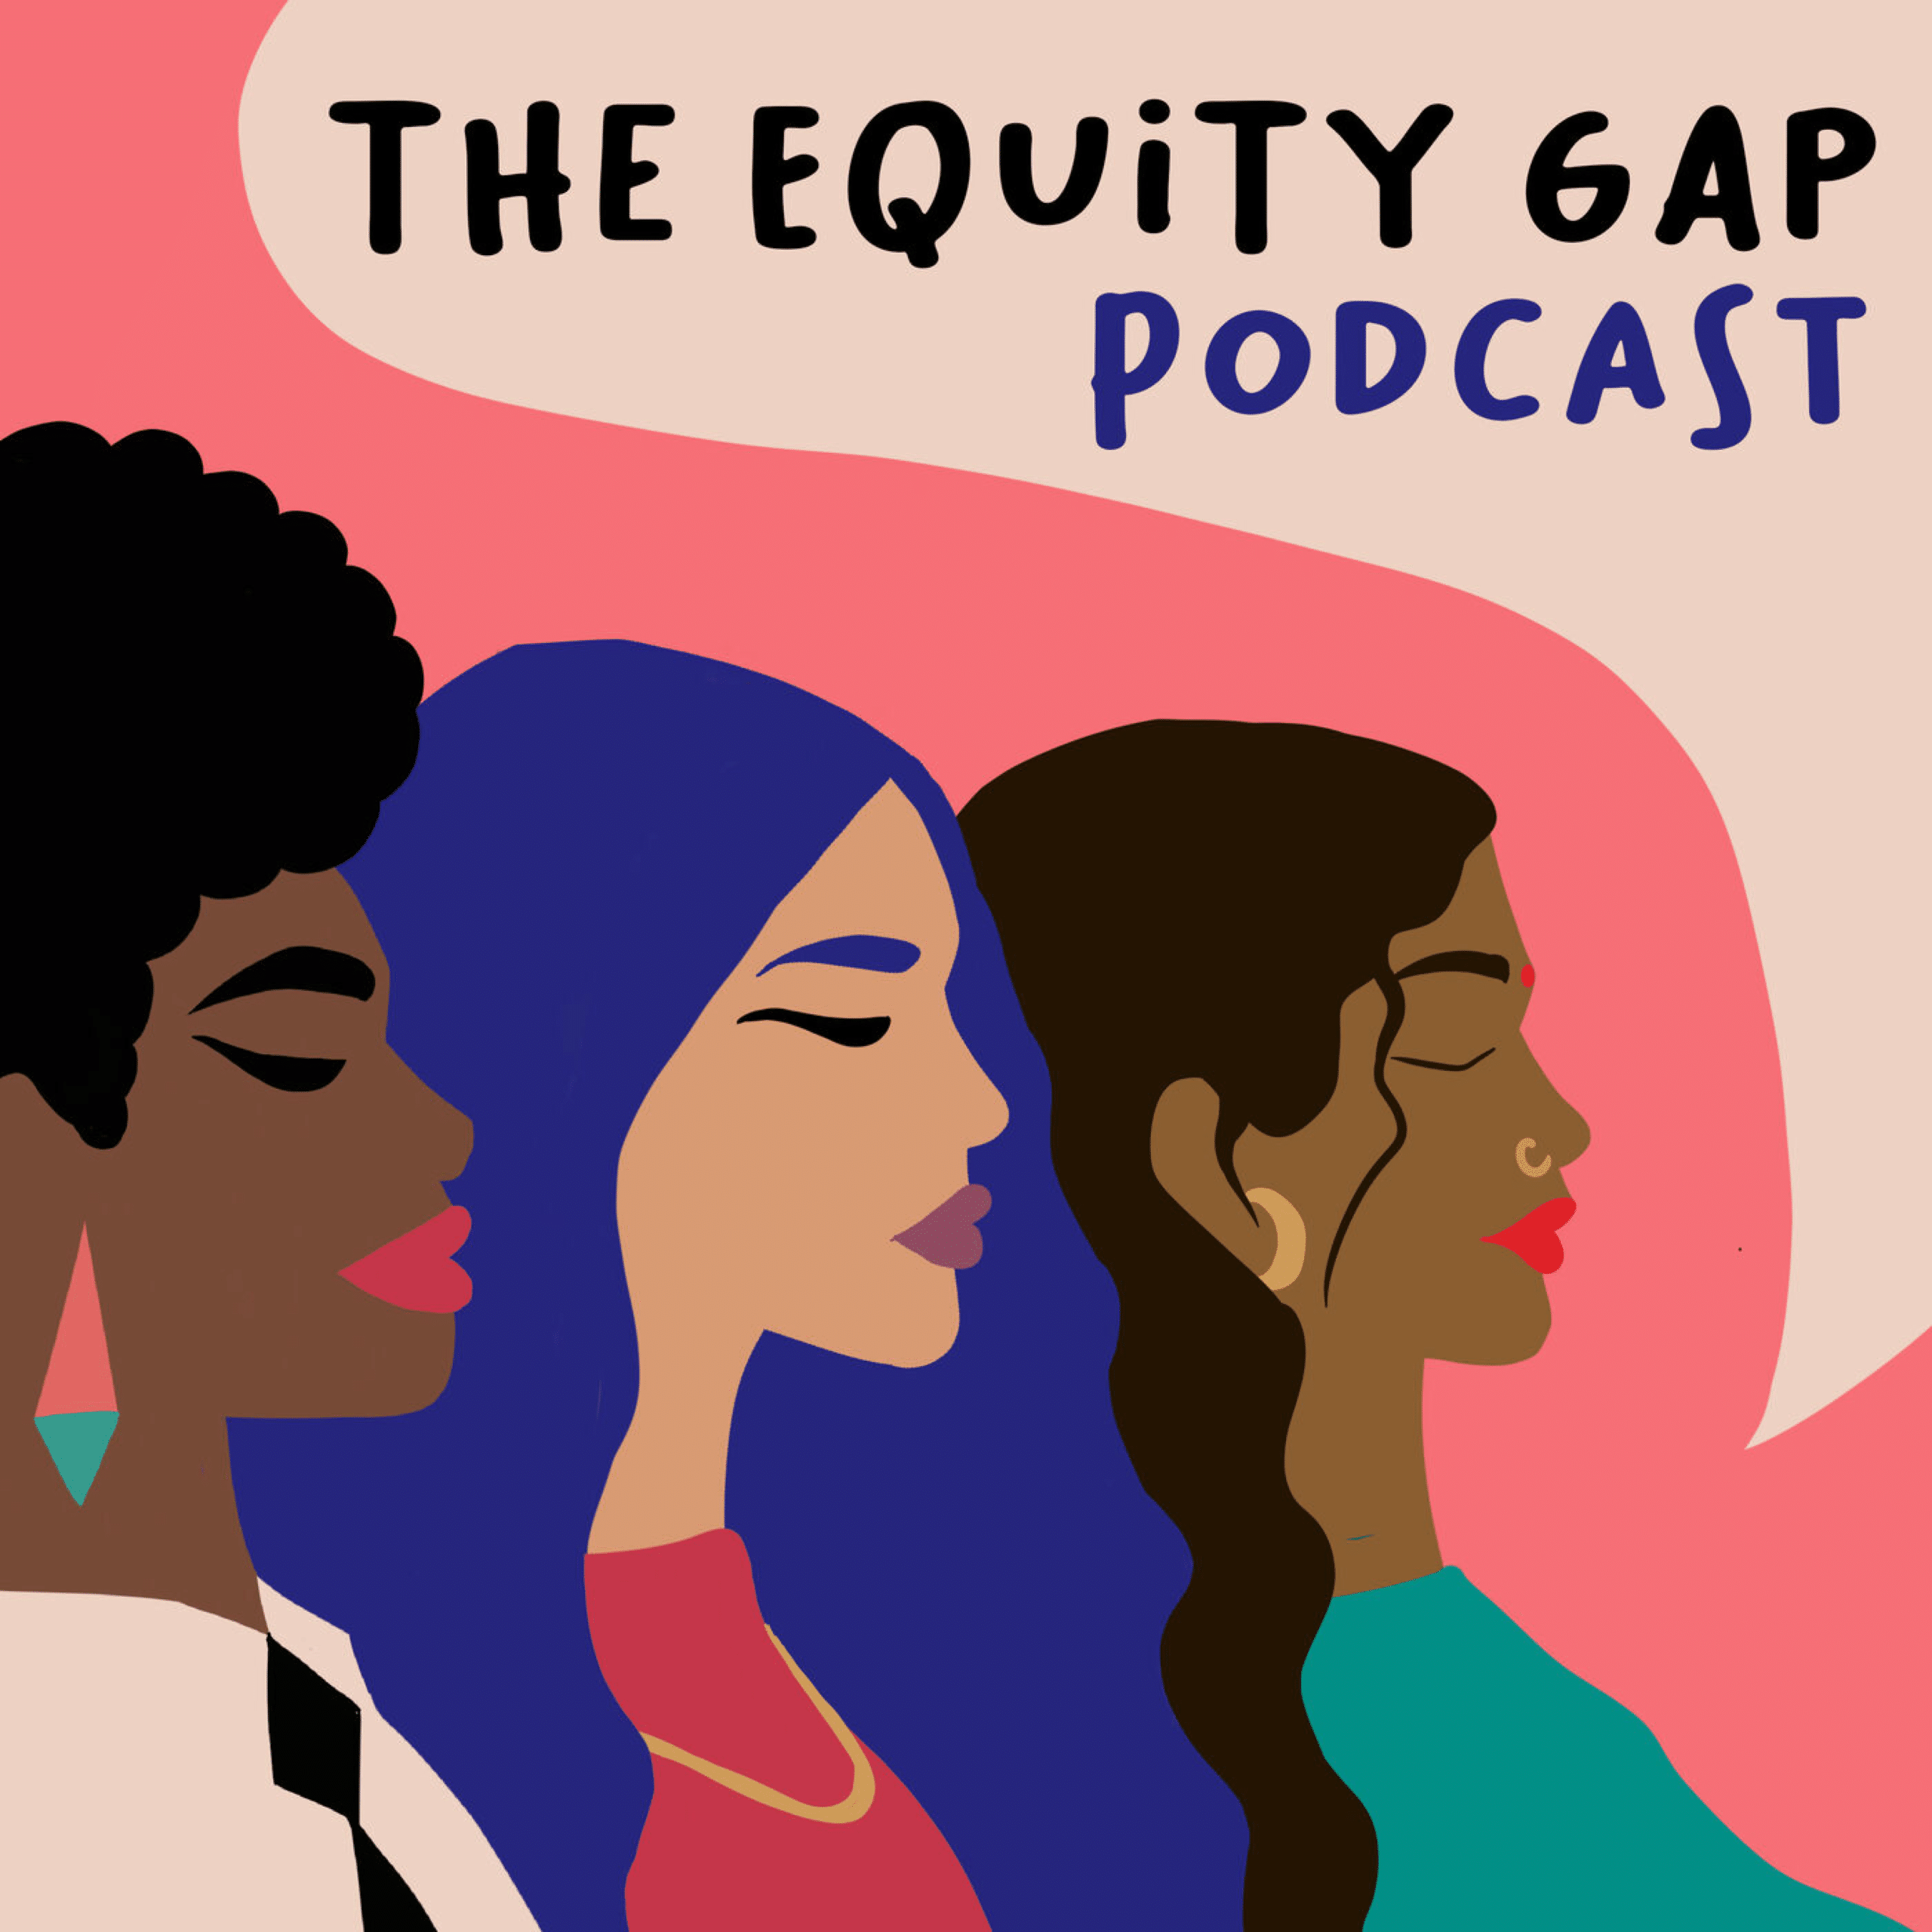 Illustration of three women looking to the right with words "The Equity Gap Podcast" at the top